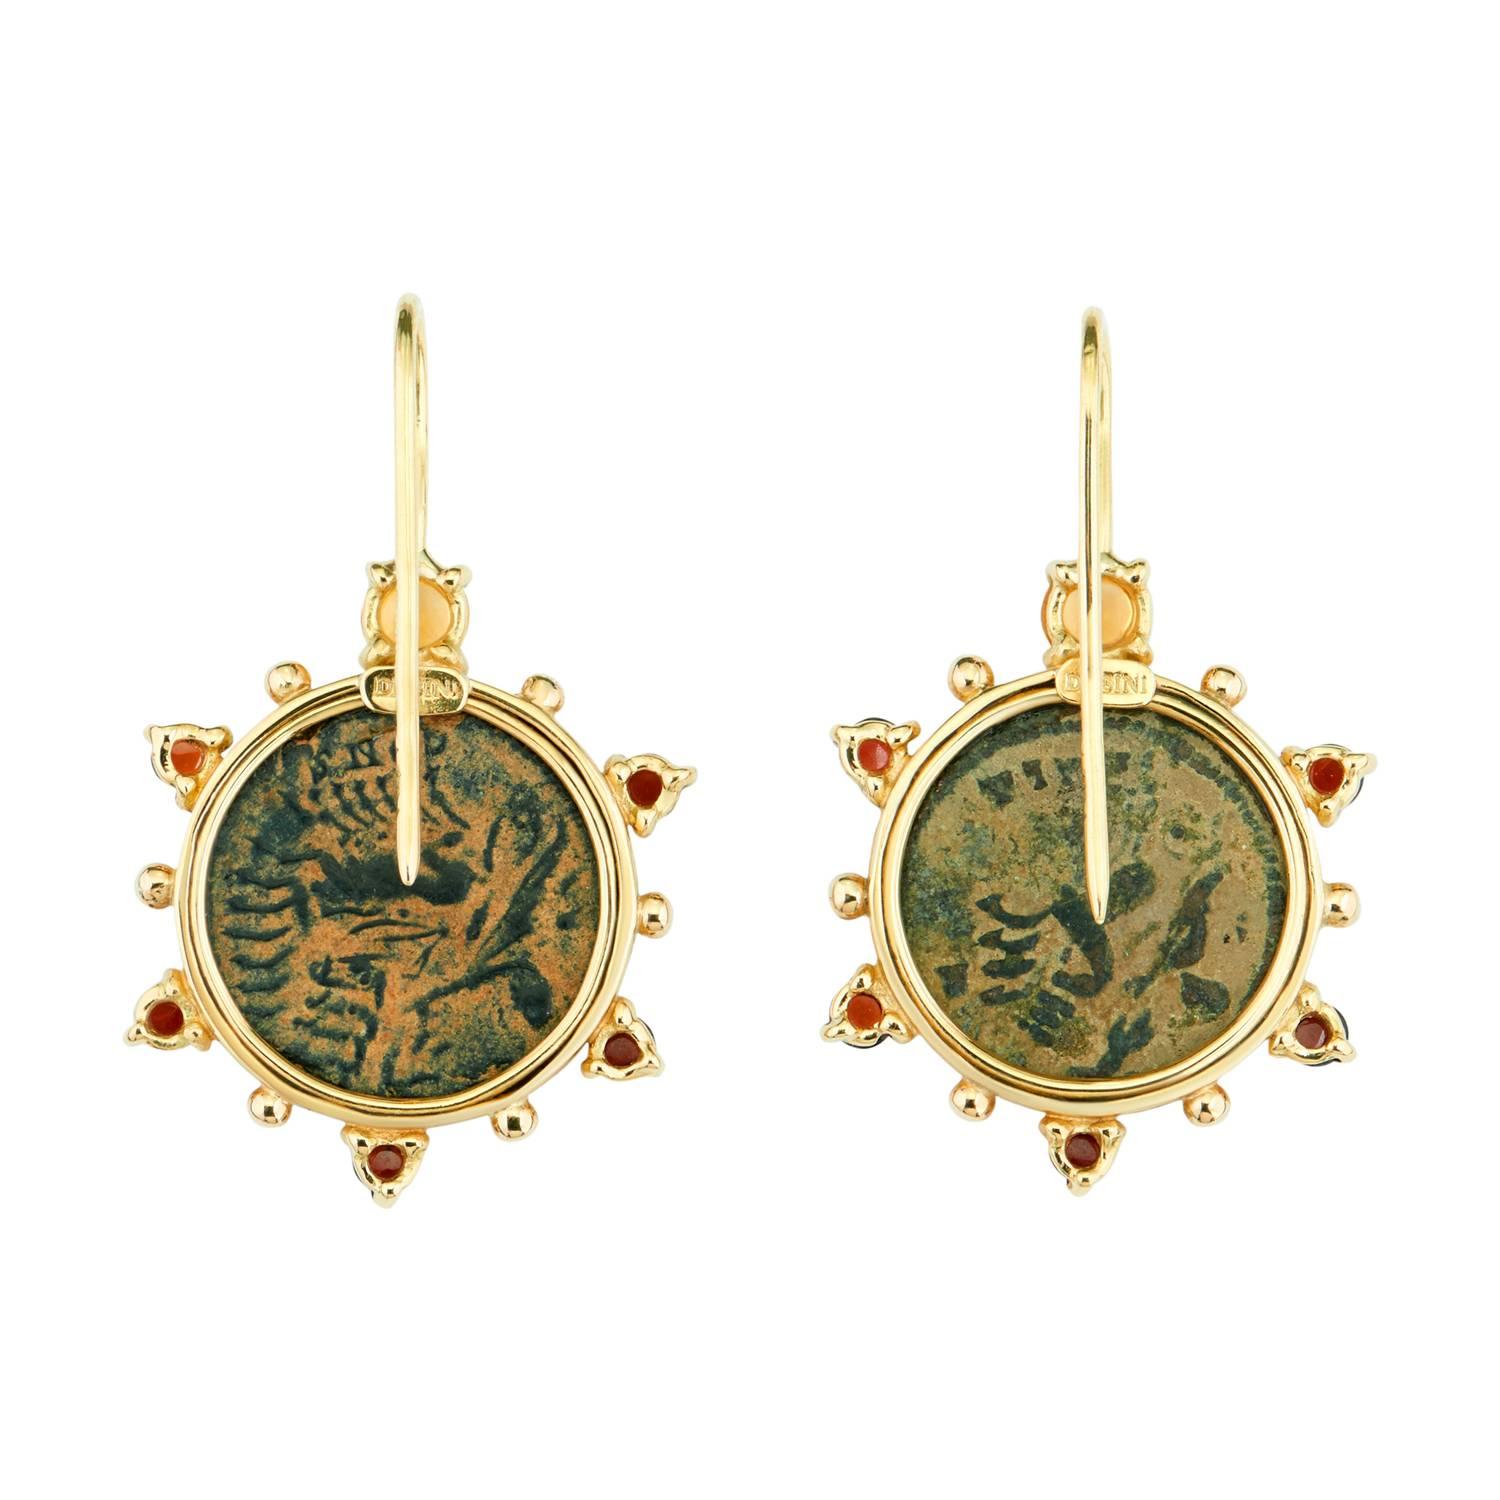 These Dubini coin earrings from the 'Empires' collection feature authentic Roman Imperial bronze coins set in 18K yellow gold with citrine and garnet cabochon stones.

* Due to the unique process of hand carving coins in ancient times, there may be